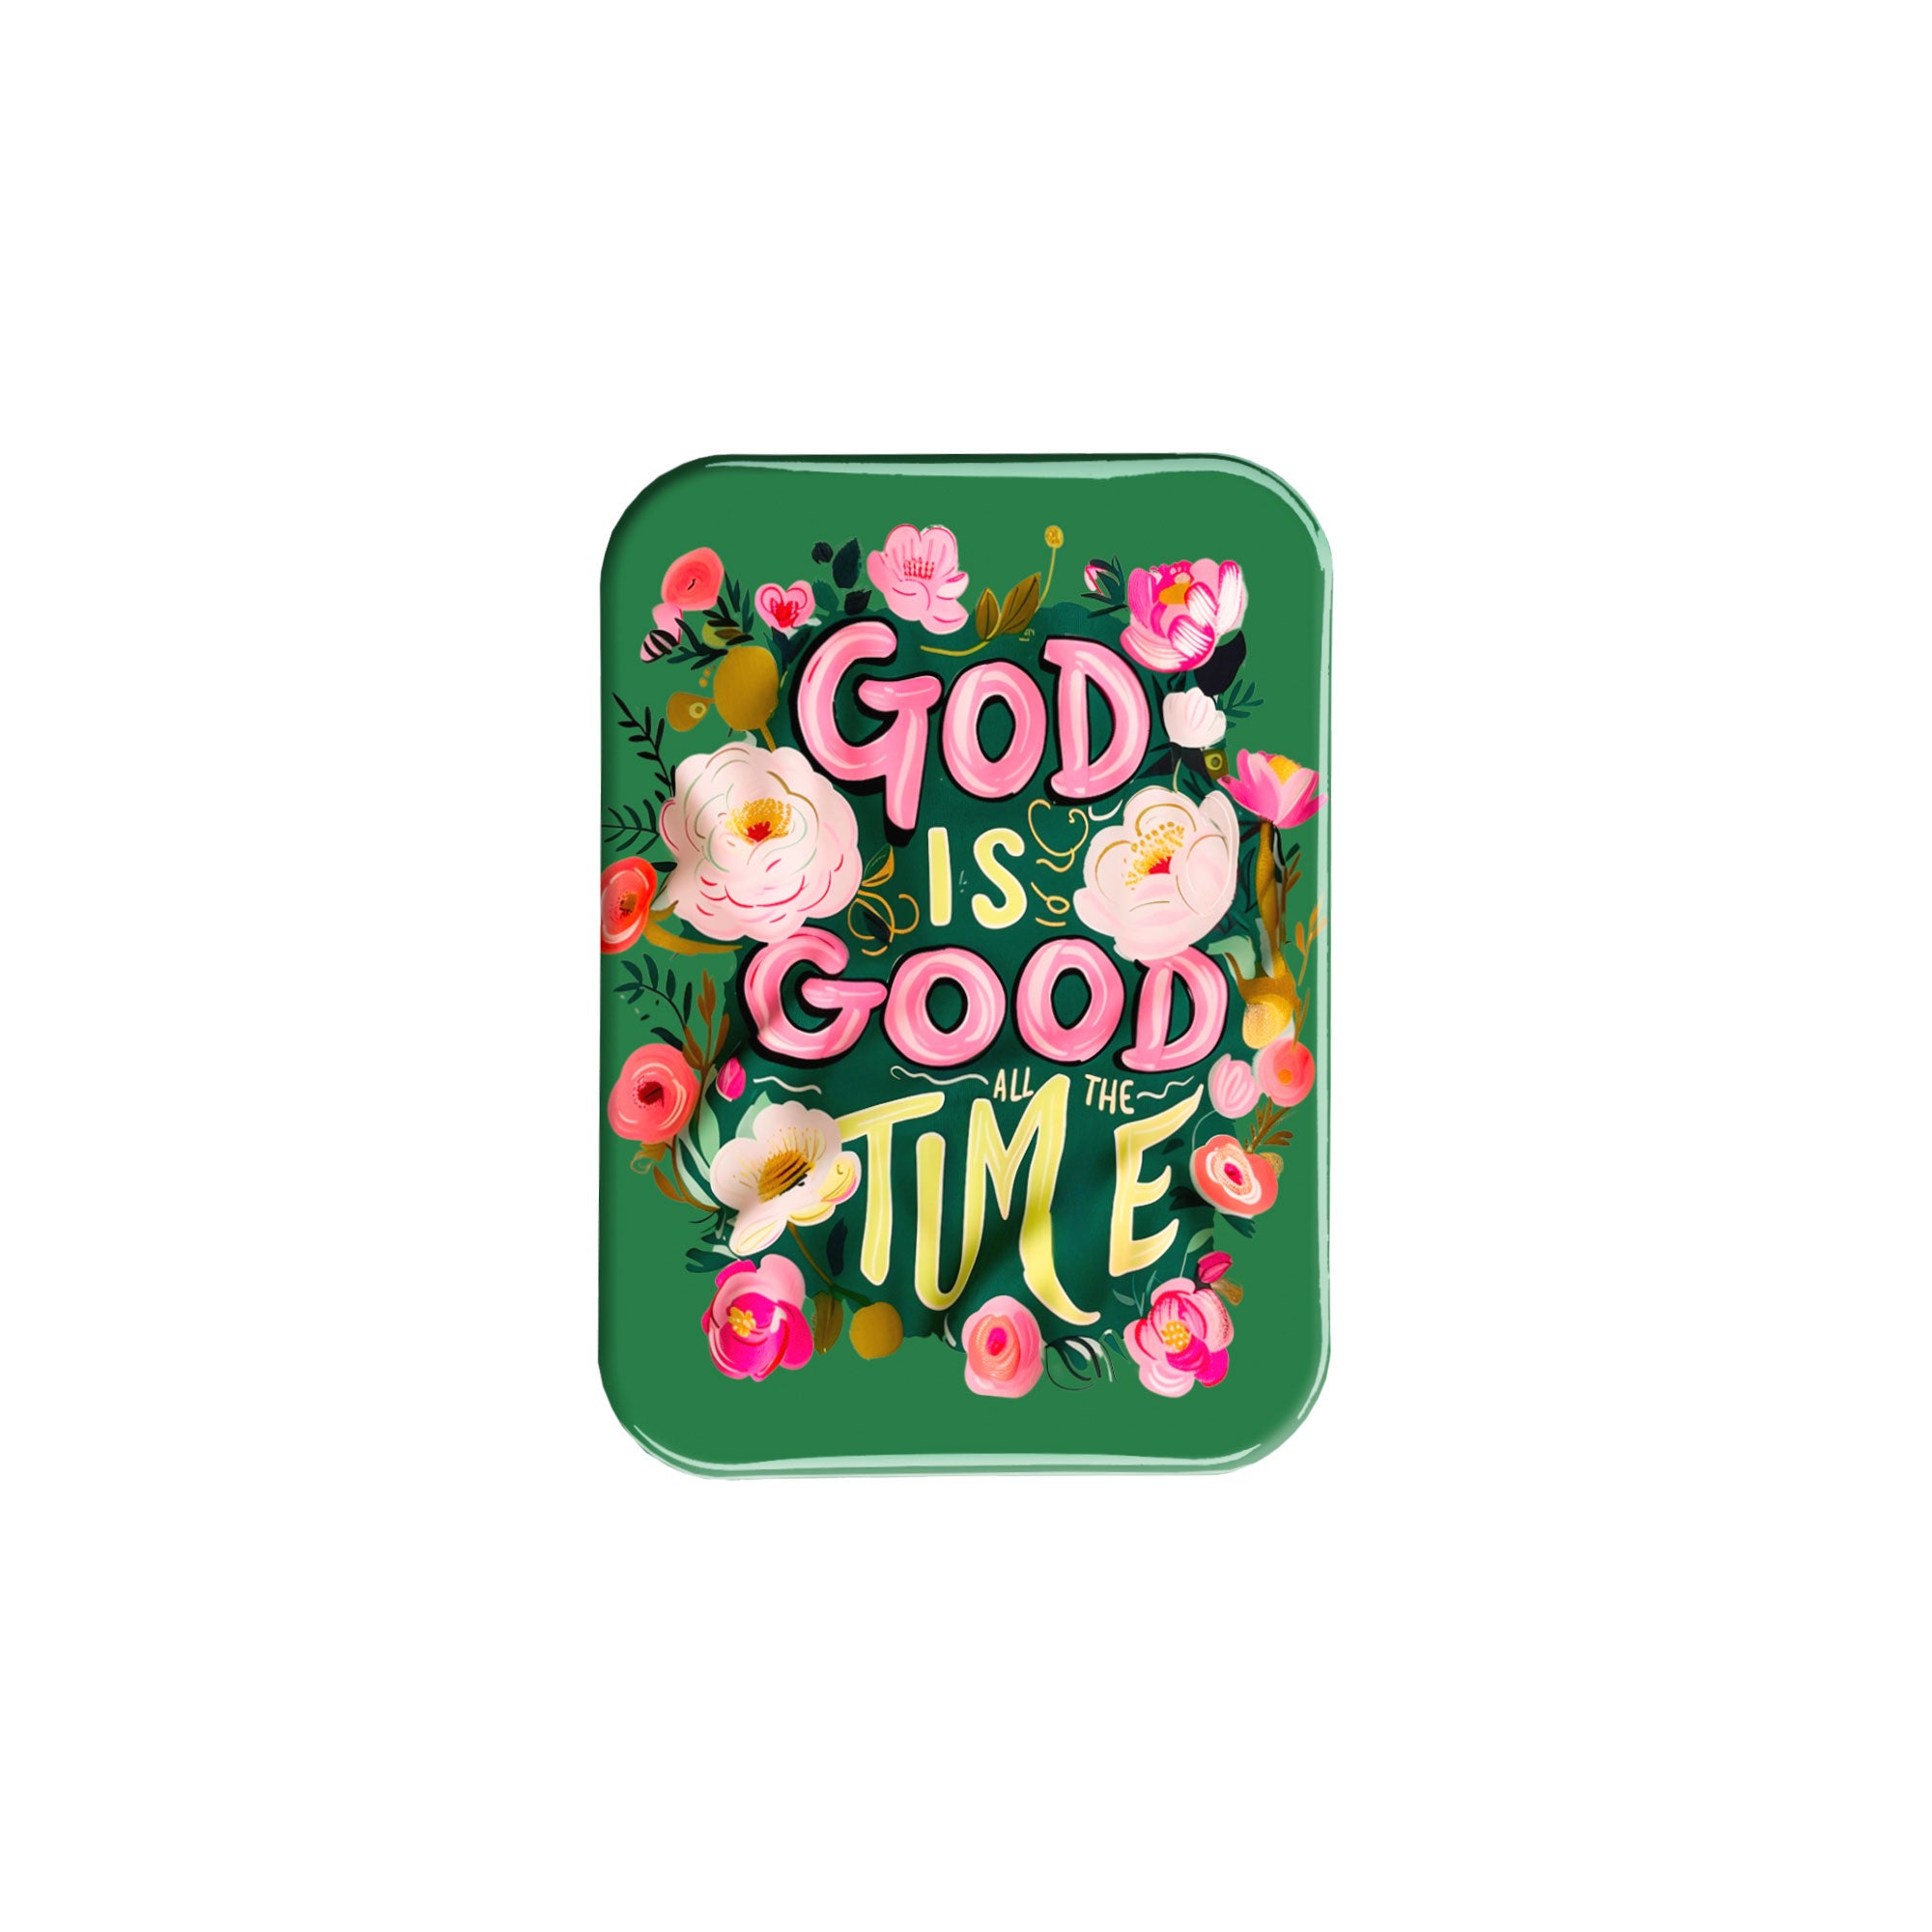 "God is Good All The Time" - 2.5" X 3.5" Rectangle Fridge Magnets